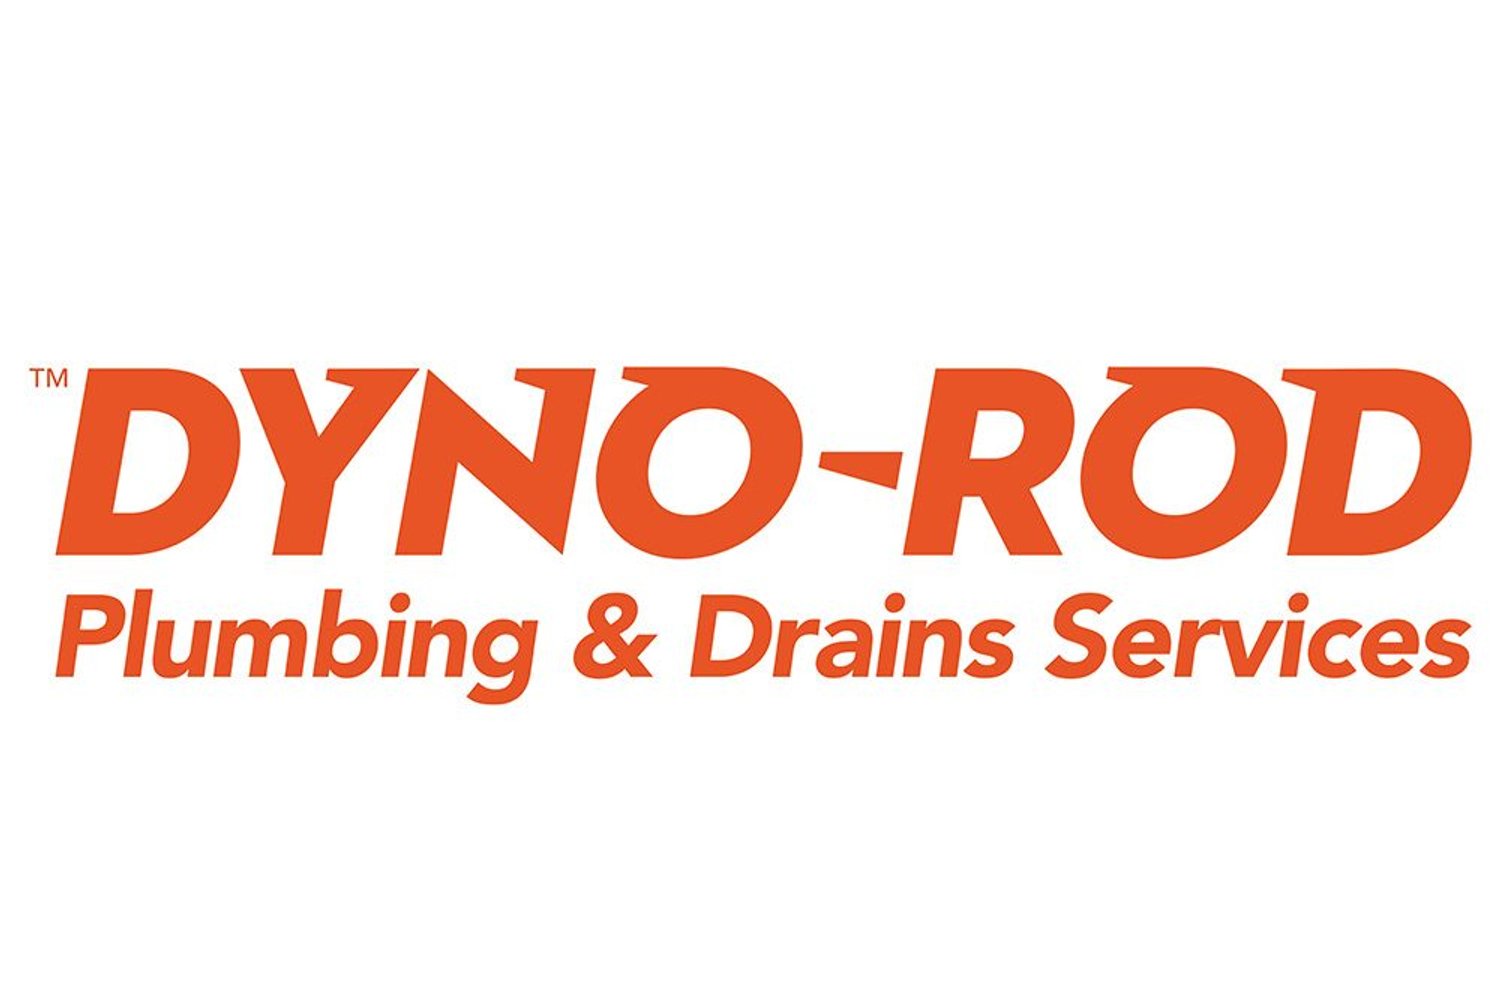 Dyno-Rod Plumbing & Drains Services